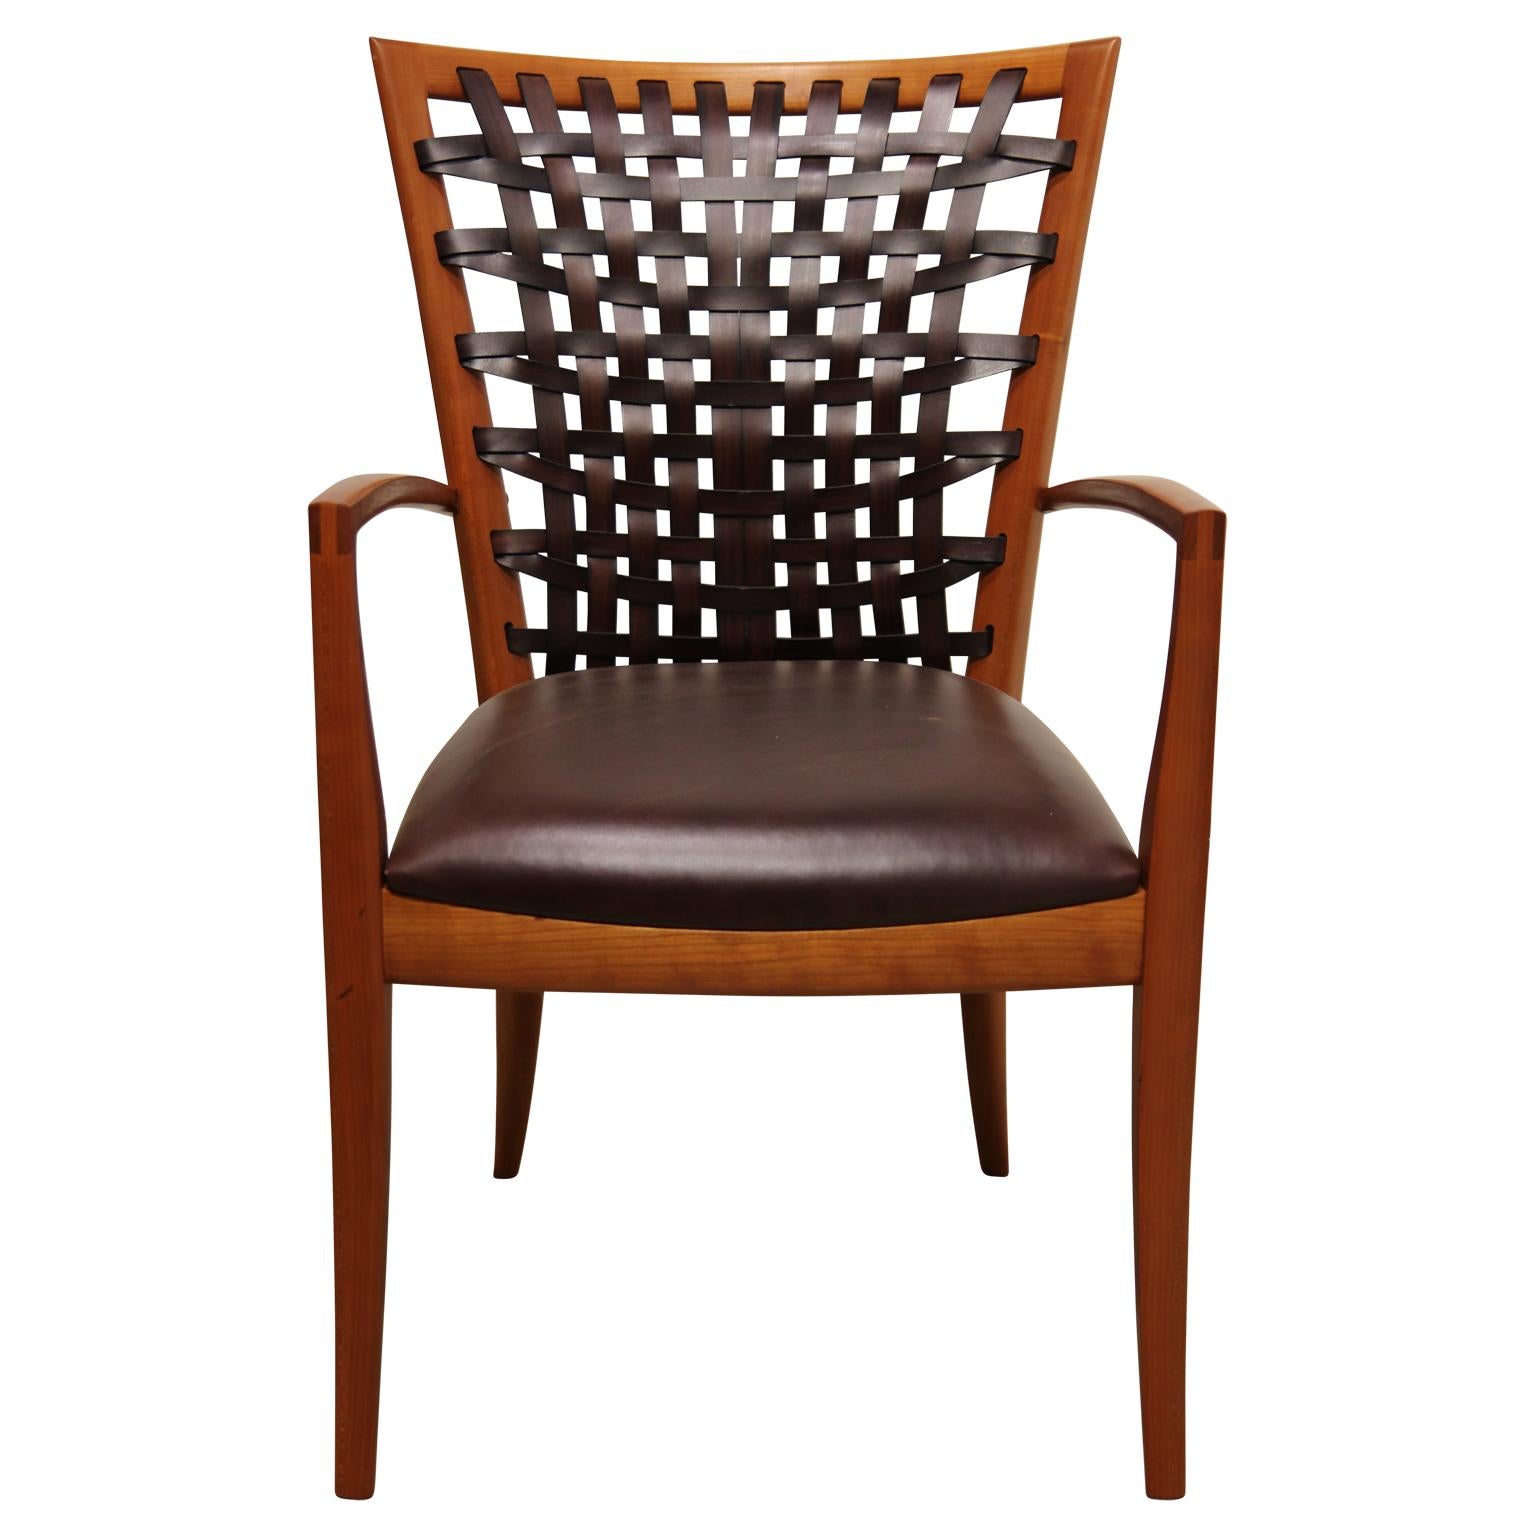 Unique sculptural designed dining chairs made from cherrywood and leather. The chairs were designed and made by Texas furniture maker, Roger Deatherage. The chairs feature a woven leather back providing adjustable support with ventilation, and